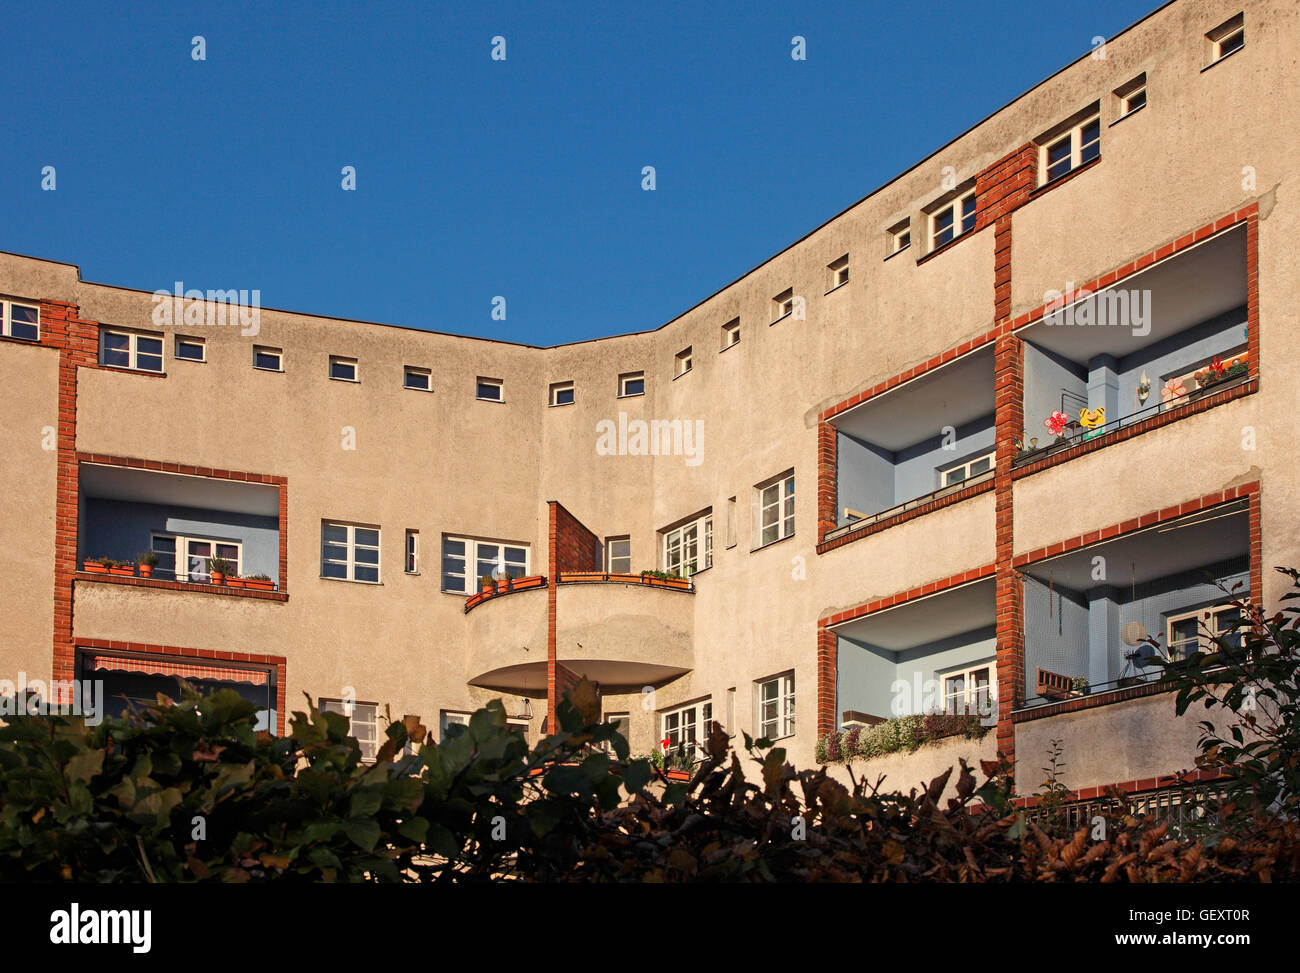 The Horseshoe Housing Estate which is a milestone of modern urban housing designed by Bruno Taut and now a UNESCO World Heritage Site in Berlin. Stock Photo